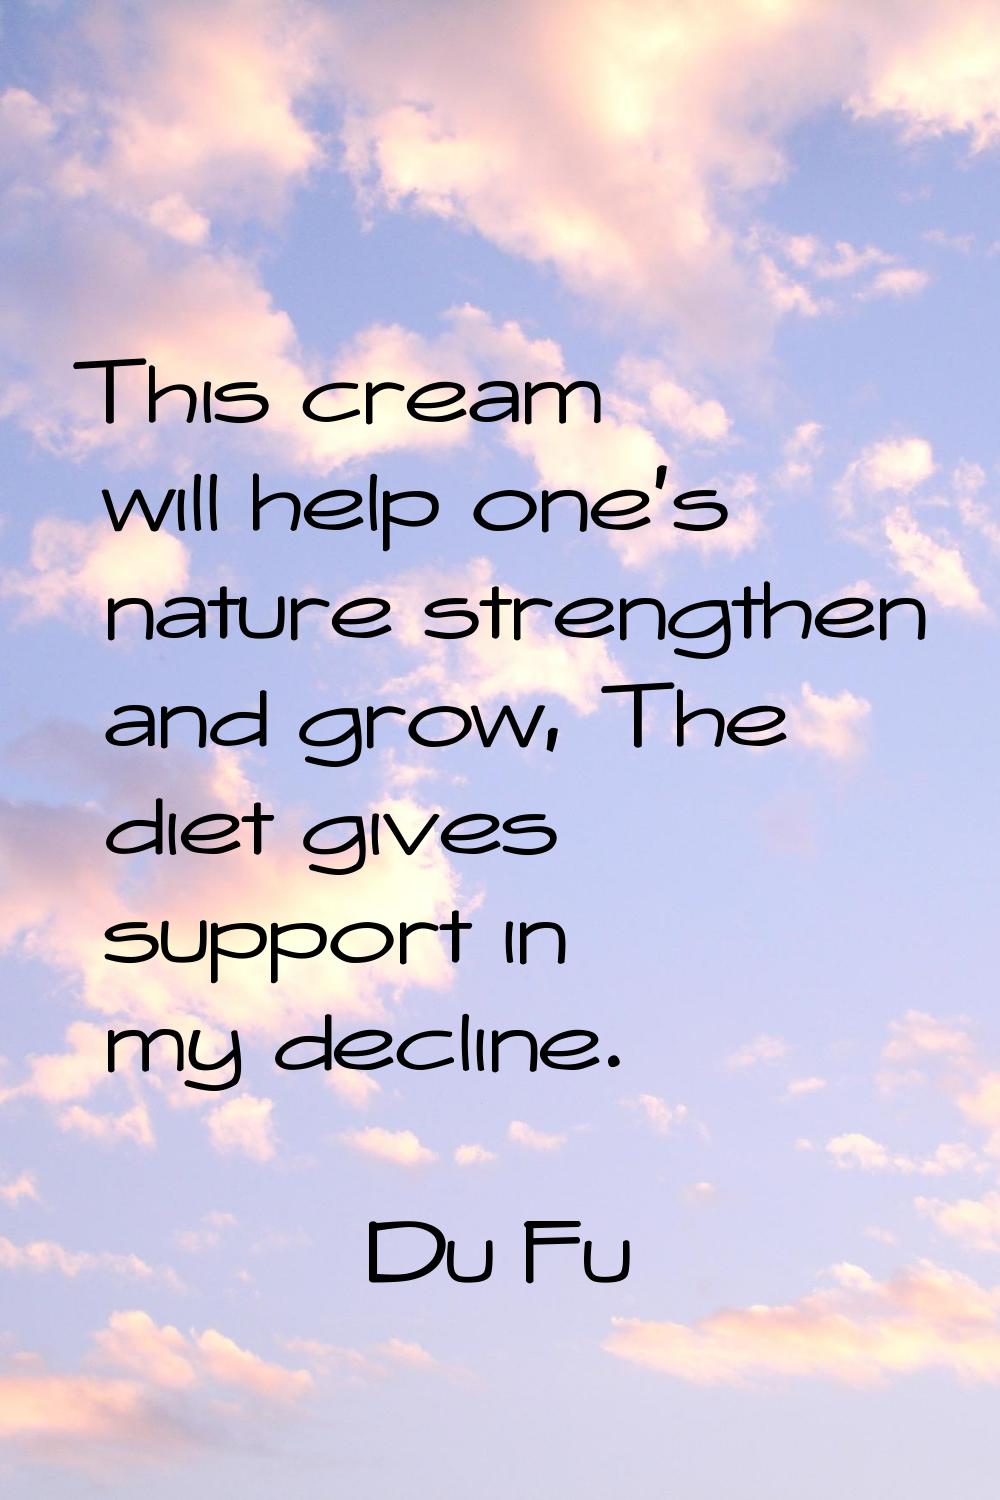 This cream will help one's nature strengthen and grow, The diet gives support in my decline.